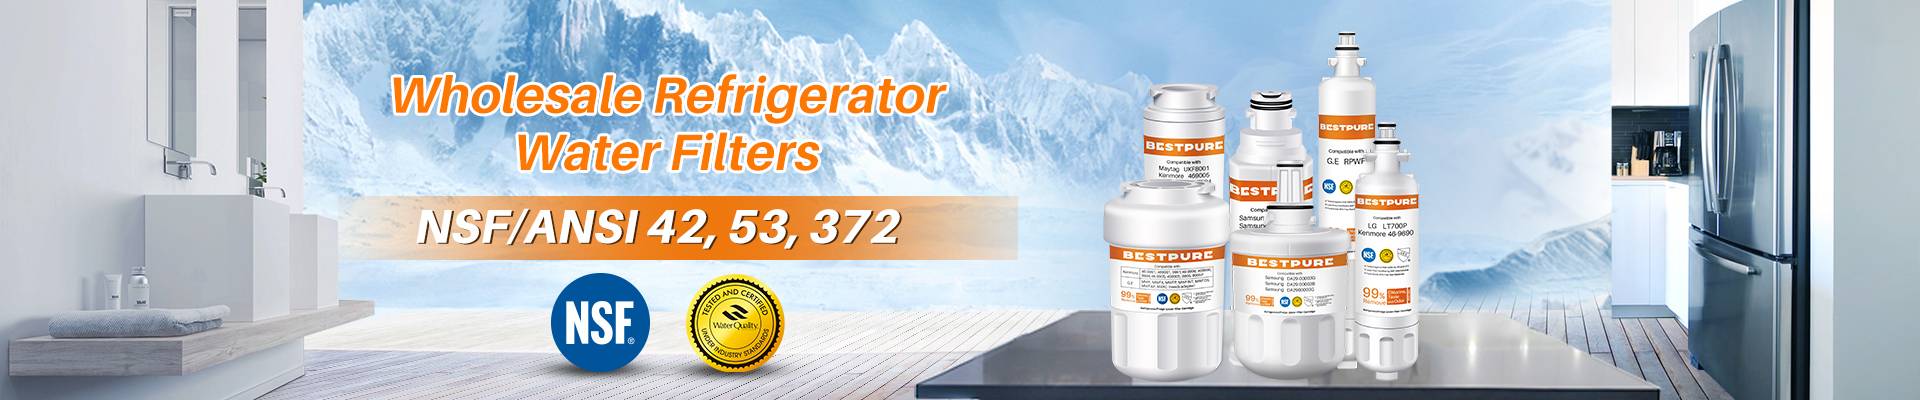 Refrigerator Water Filters Wholesale